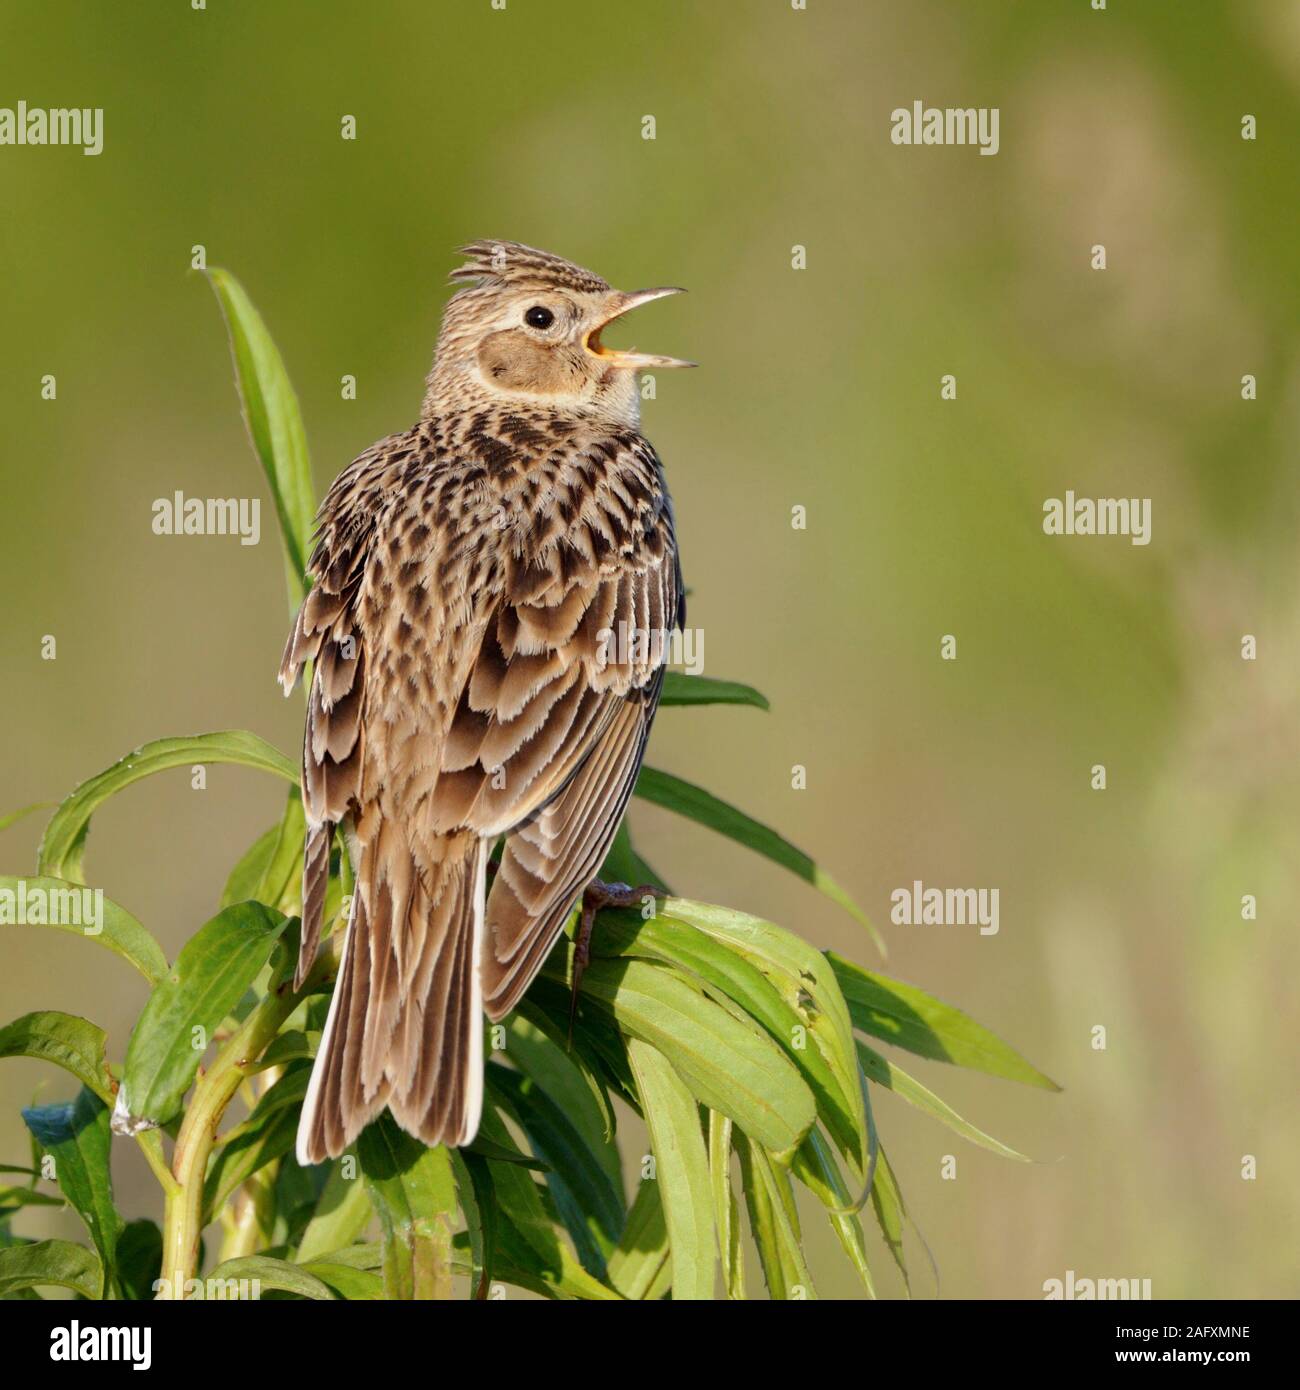 Skylark / Feldlerche ( Alauda arvensis ) perched on top of a plant, singing its typical song, nice backside view, wildlife, Europe. Stock Photo